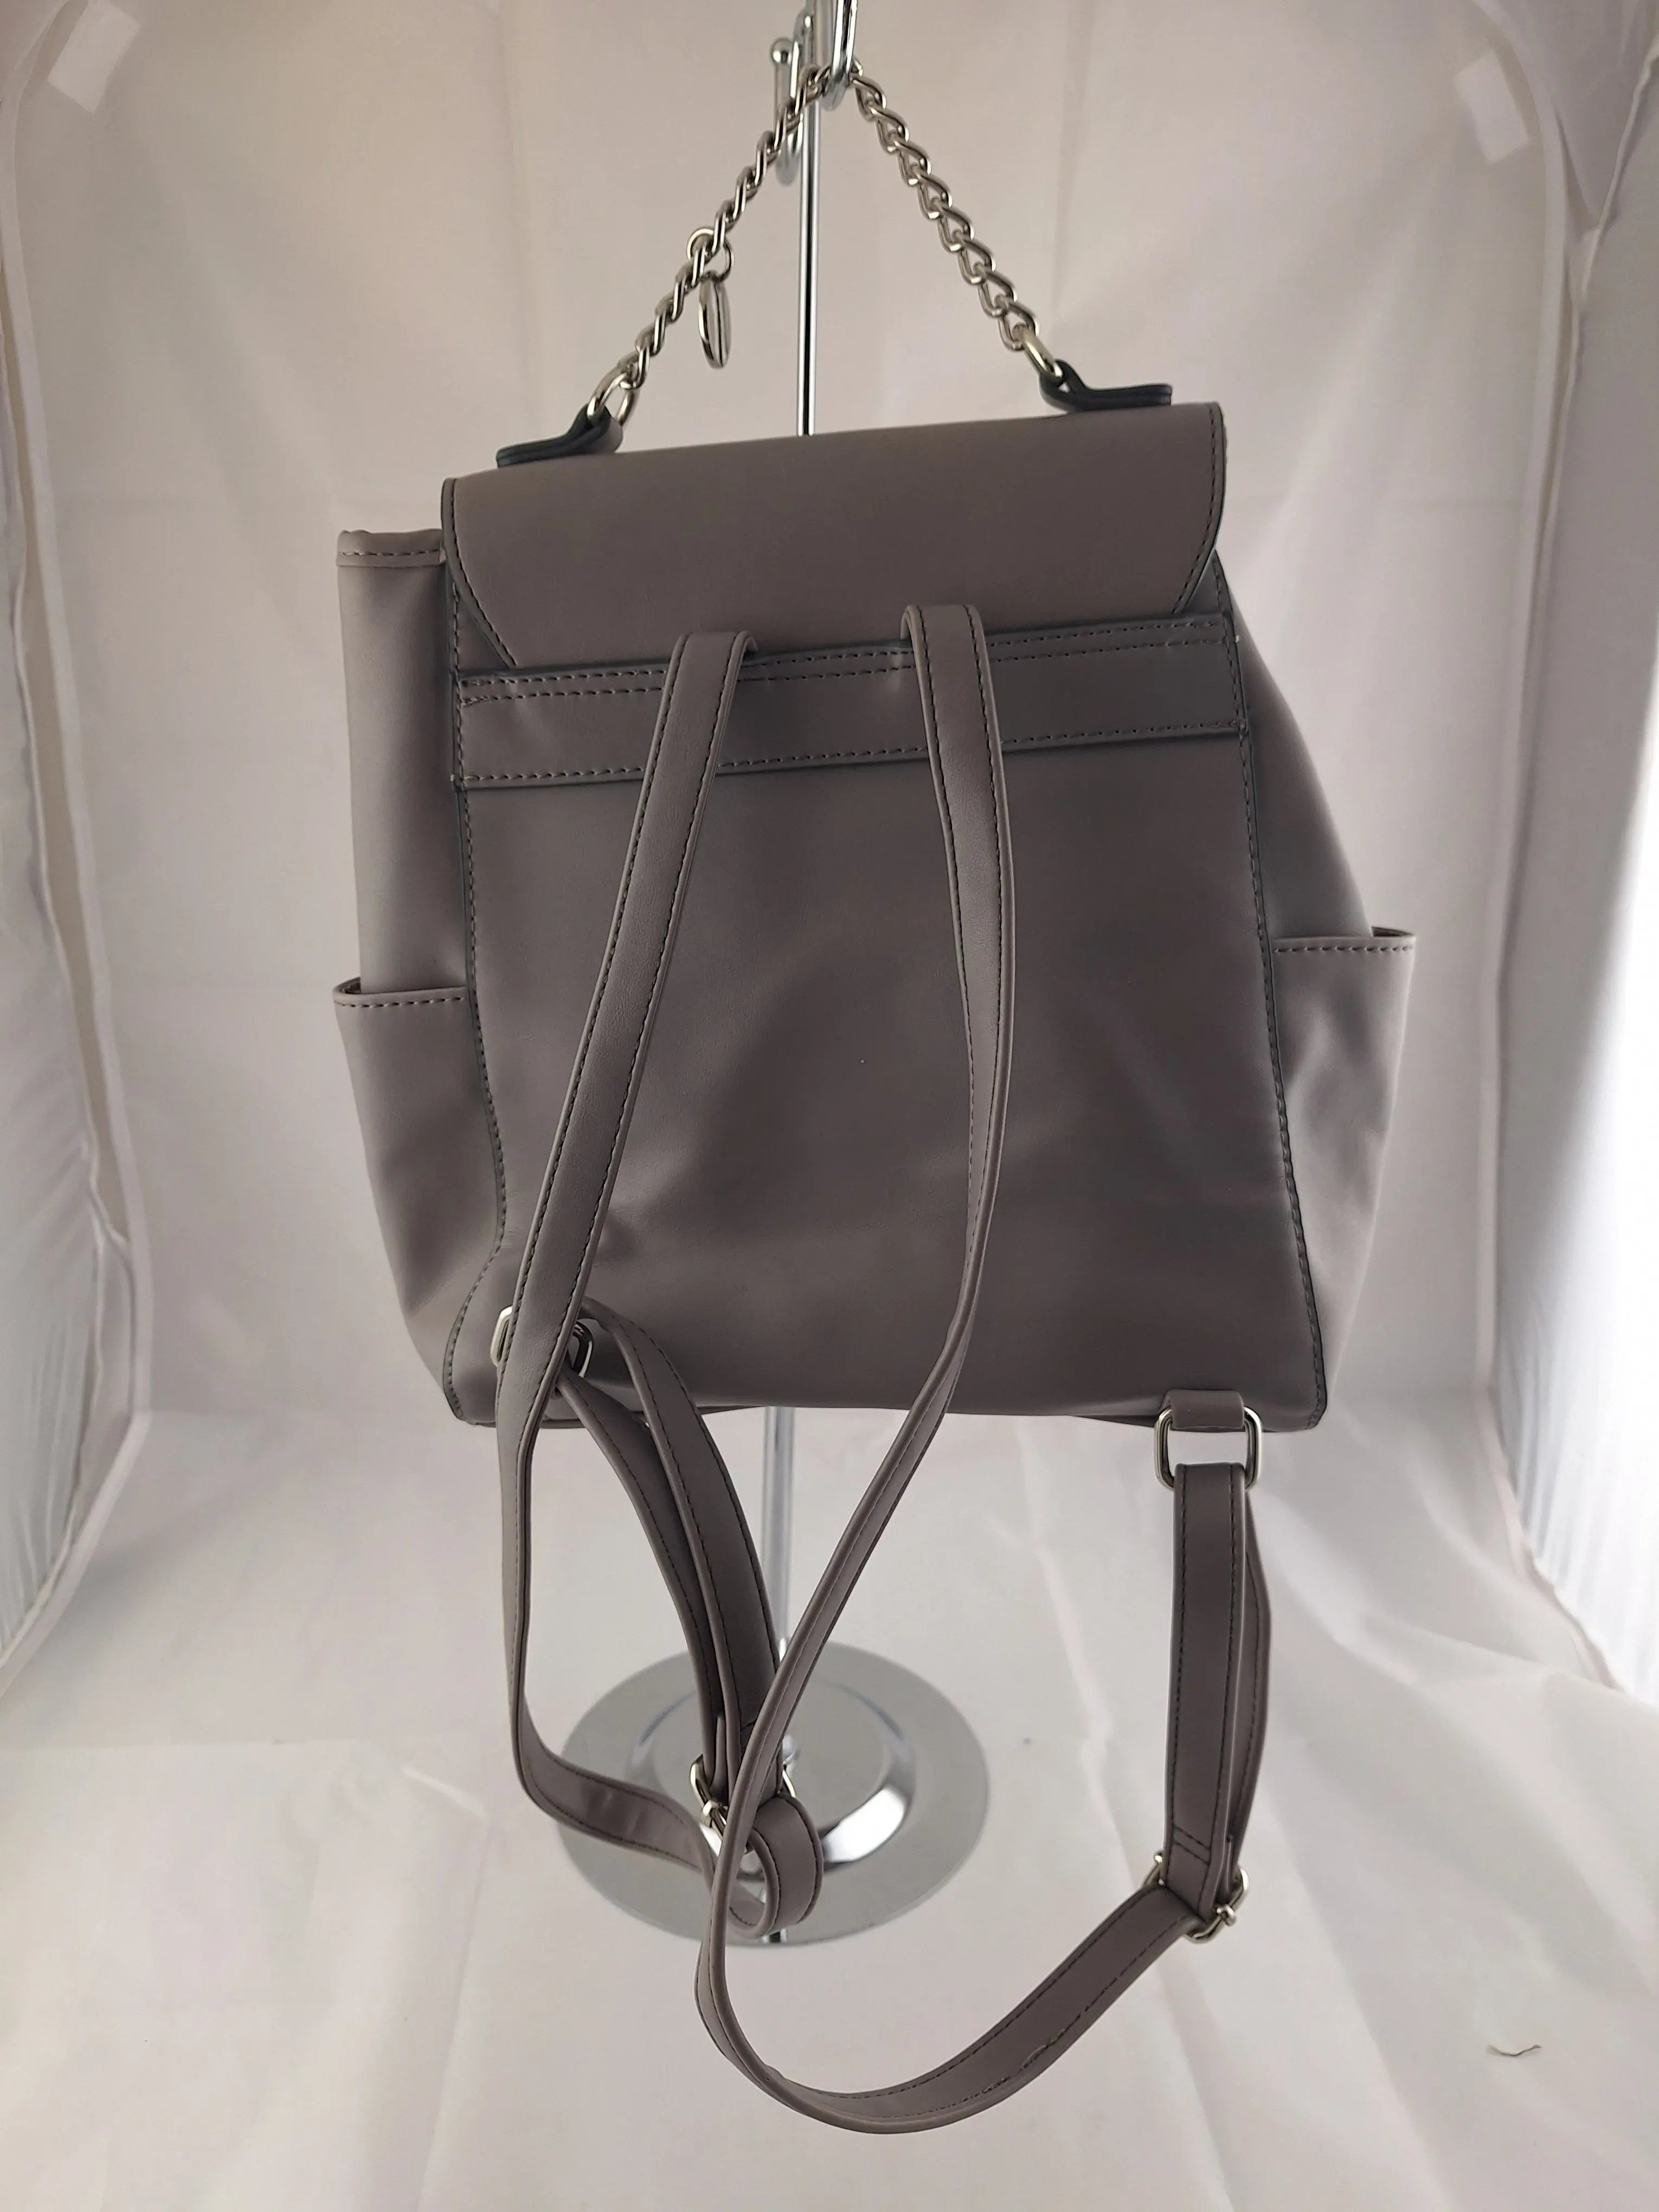 Nine West Small Backpack Purse – St. John's Institute (Hua Ming)